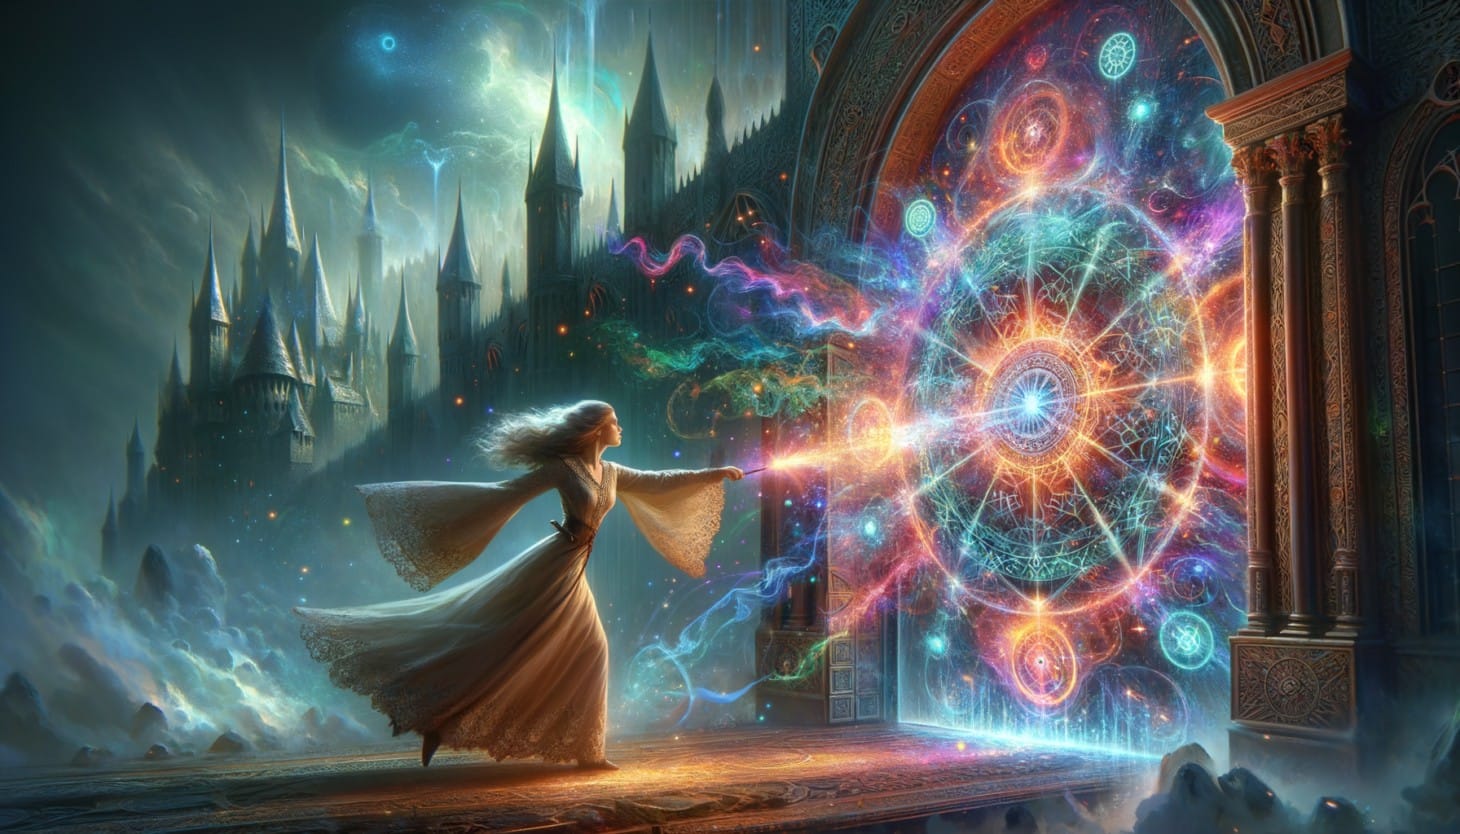 A sorceress casts a spell to open a magically sealed castle gate. The door is alight with runic patterns of colour.